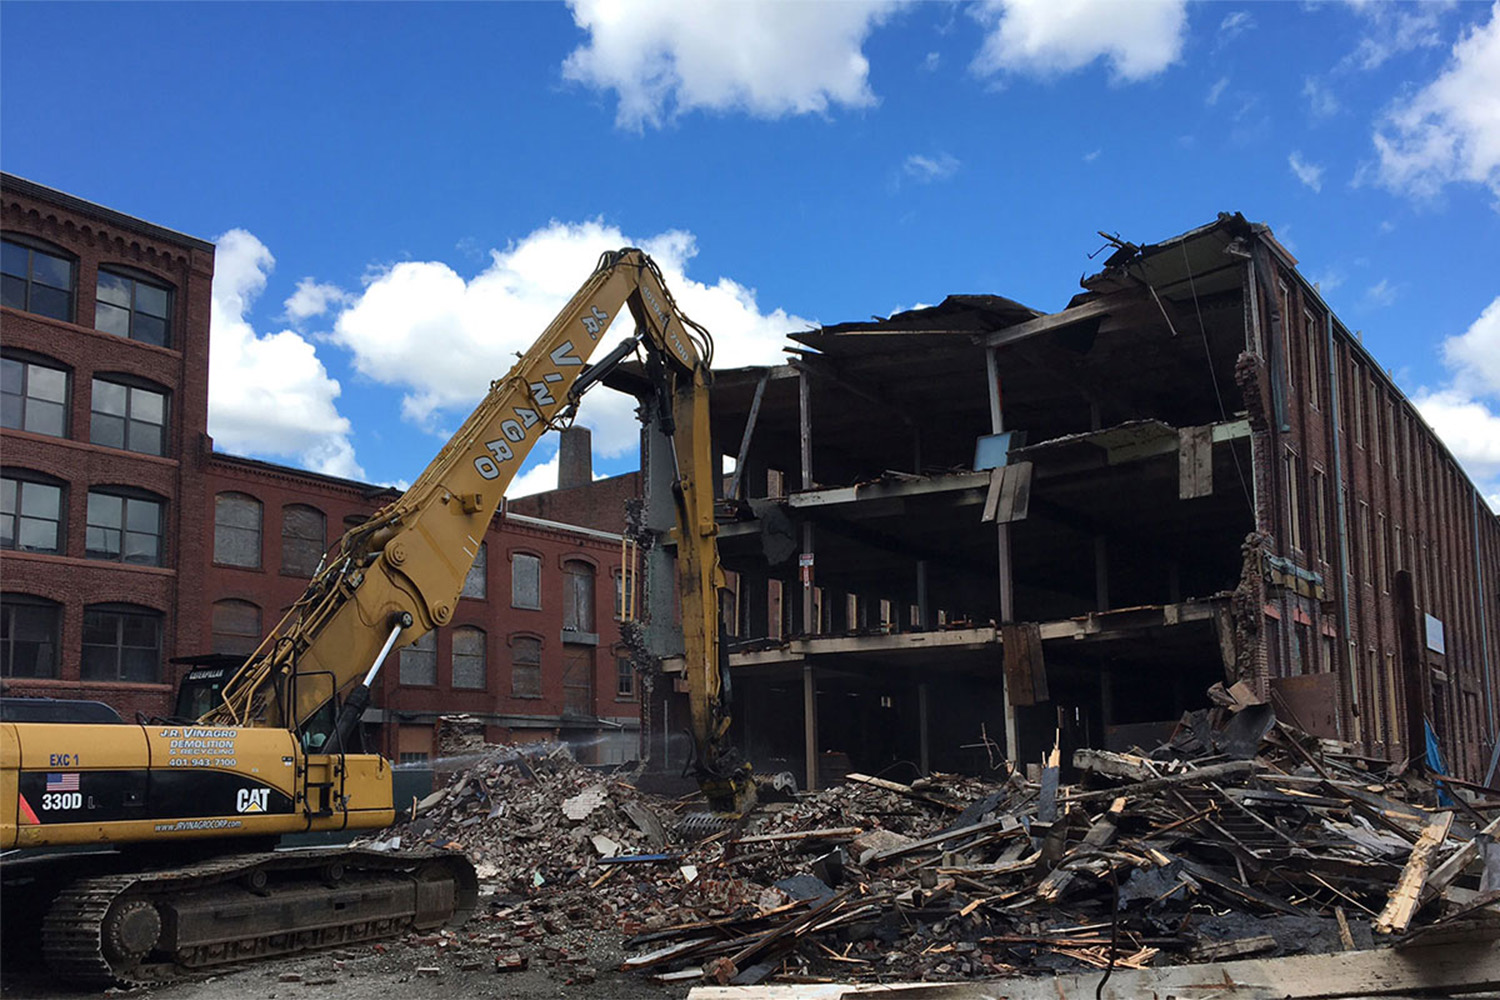 Demolition excavator in front of partially destroyed red brick building